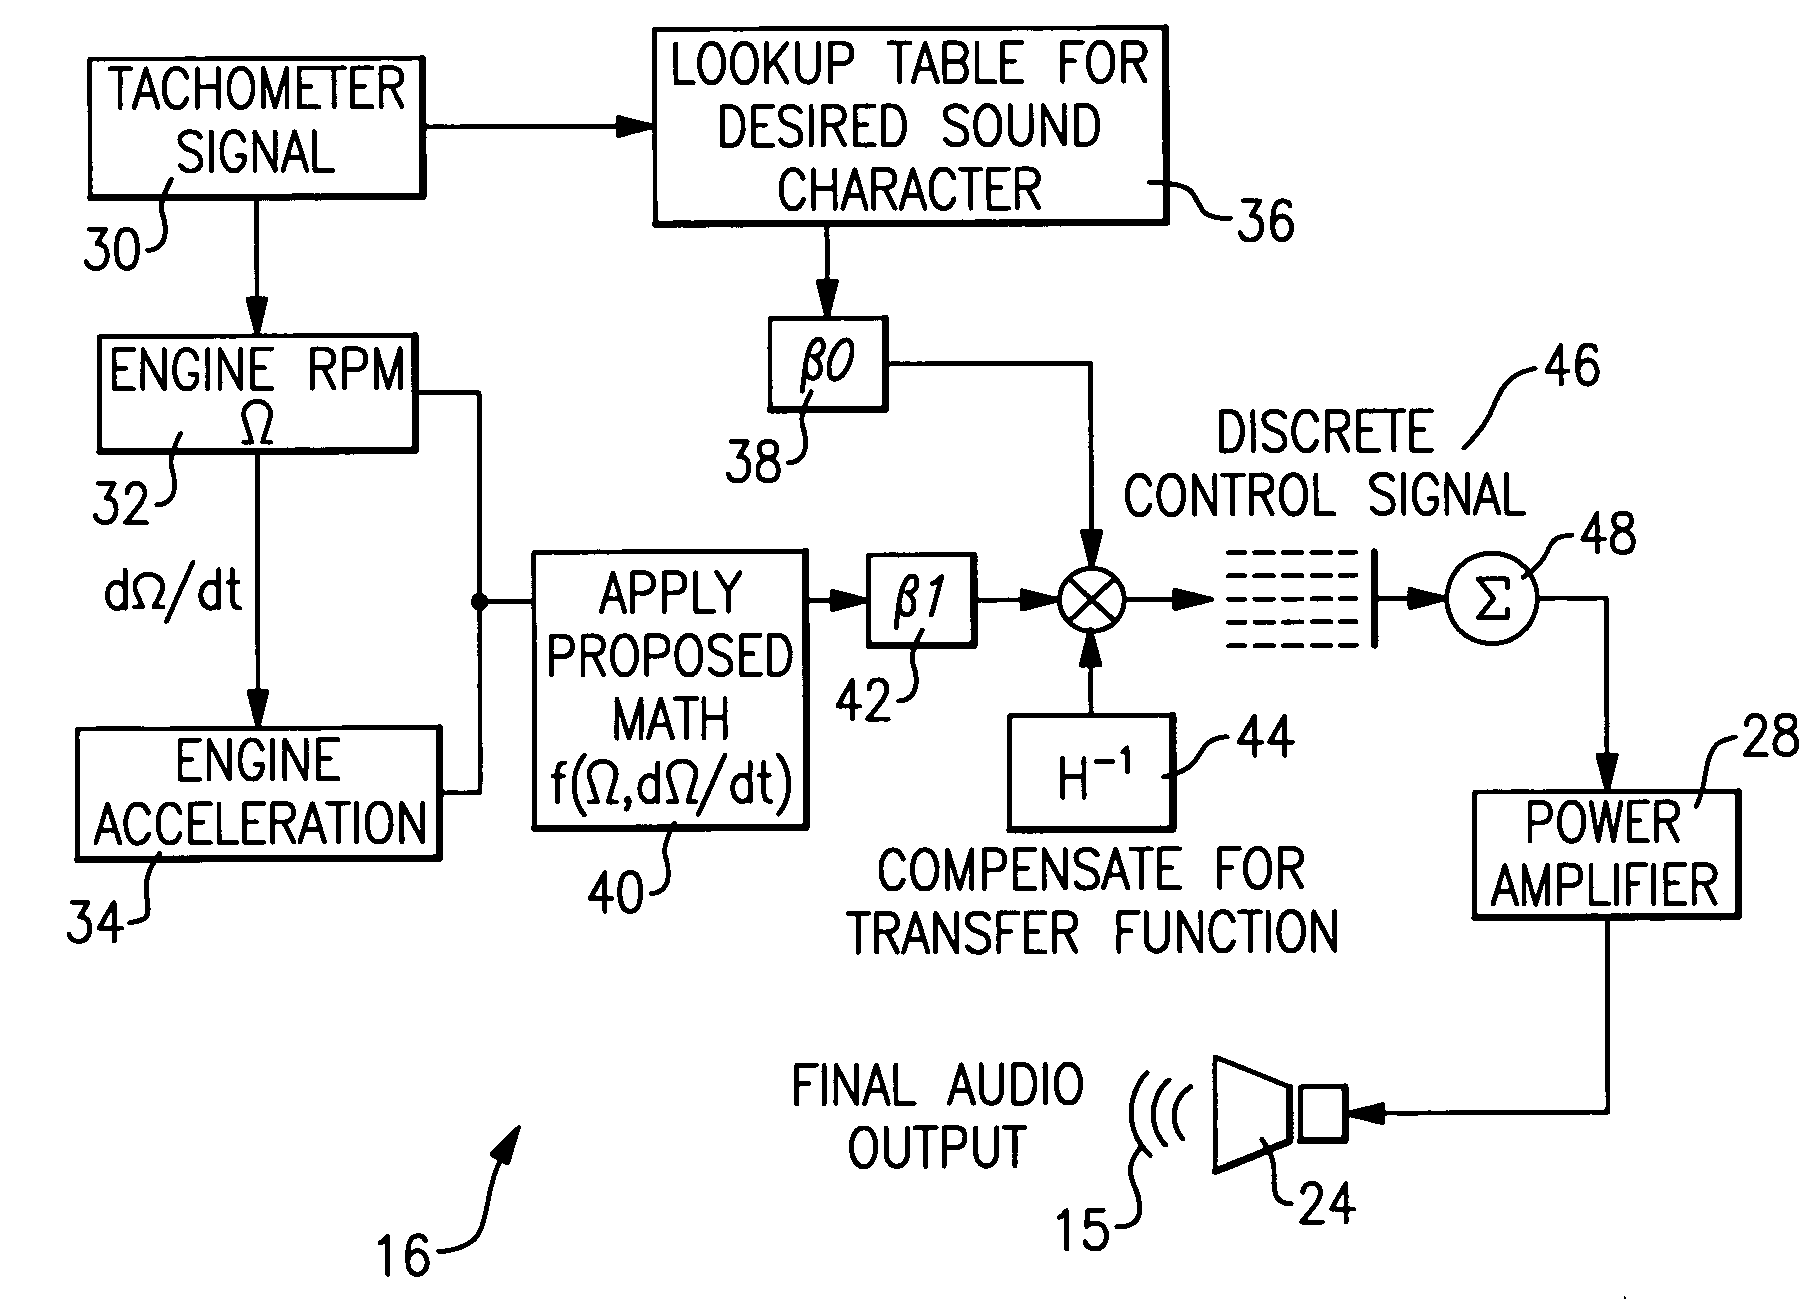 Robust system for sound enhancement from a single engine sensor